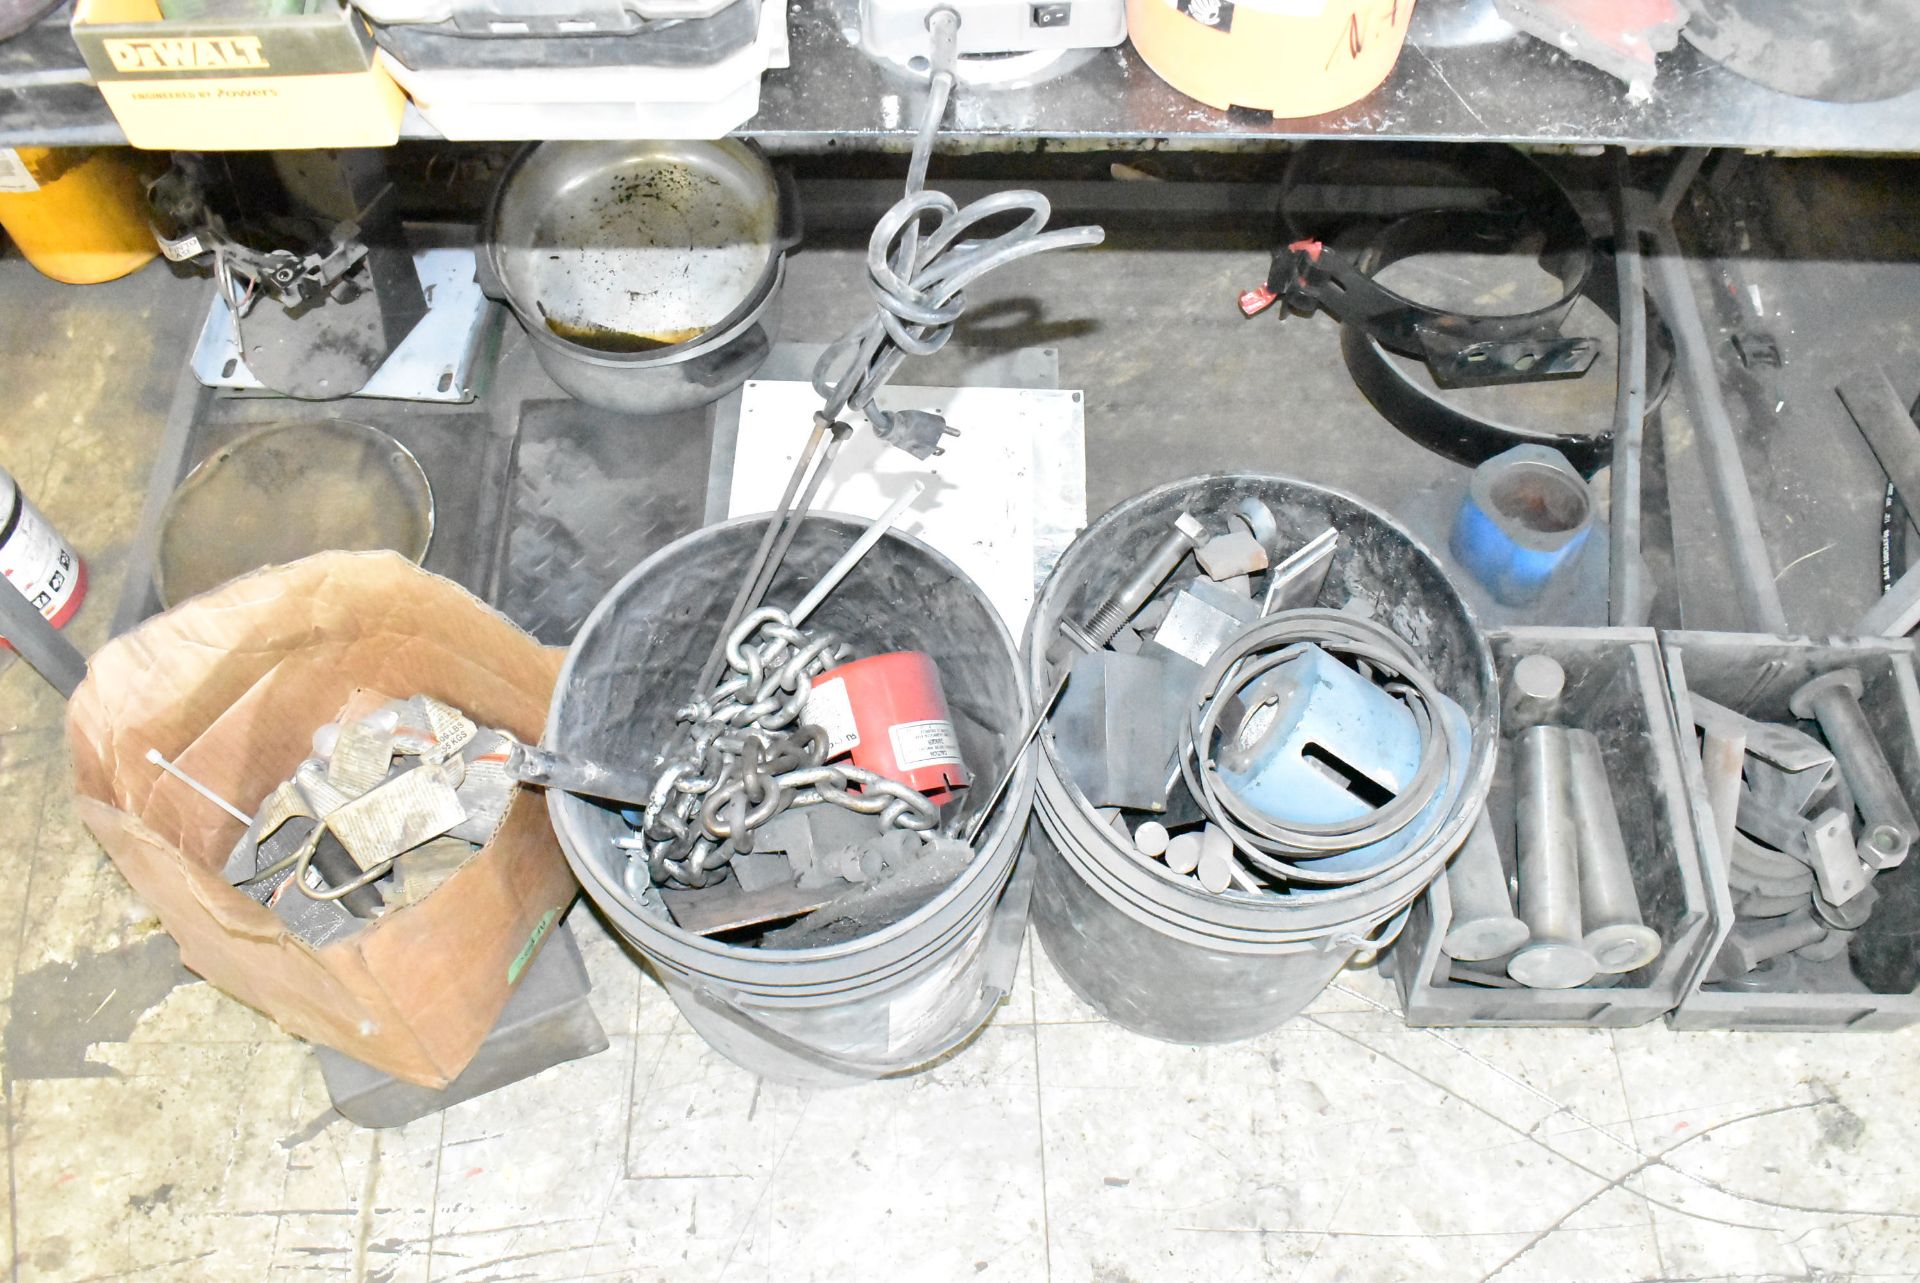 LOT/ SHOP TABLE WITH CONTENTS CONSISTING OF DRILL SHARPENER, HARDWARE, FITTINGS AND SUPPLIES - Image 4 of 4